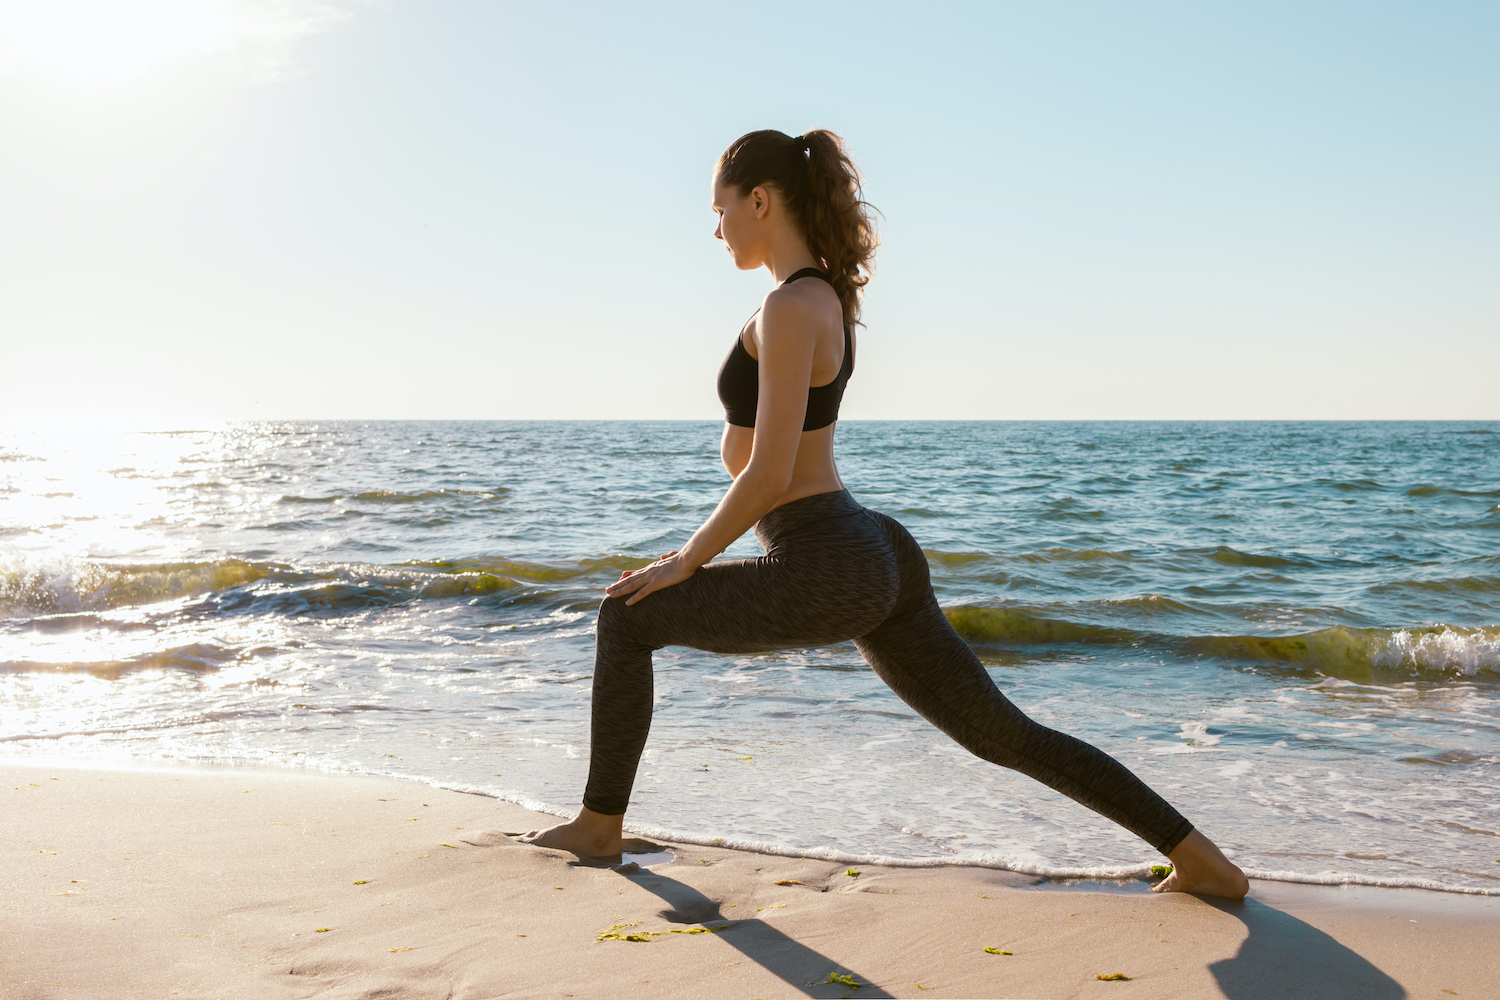 Health conscious woman on a beach doing lunges exercises